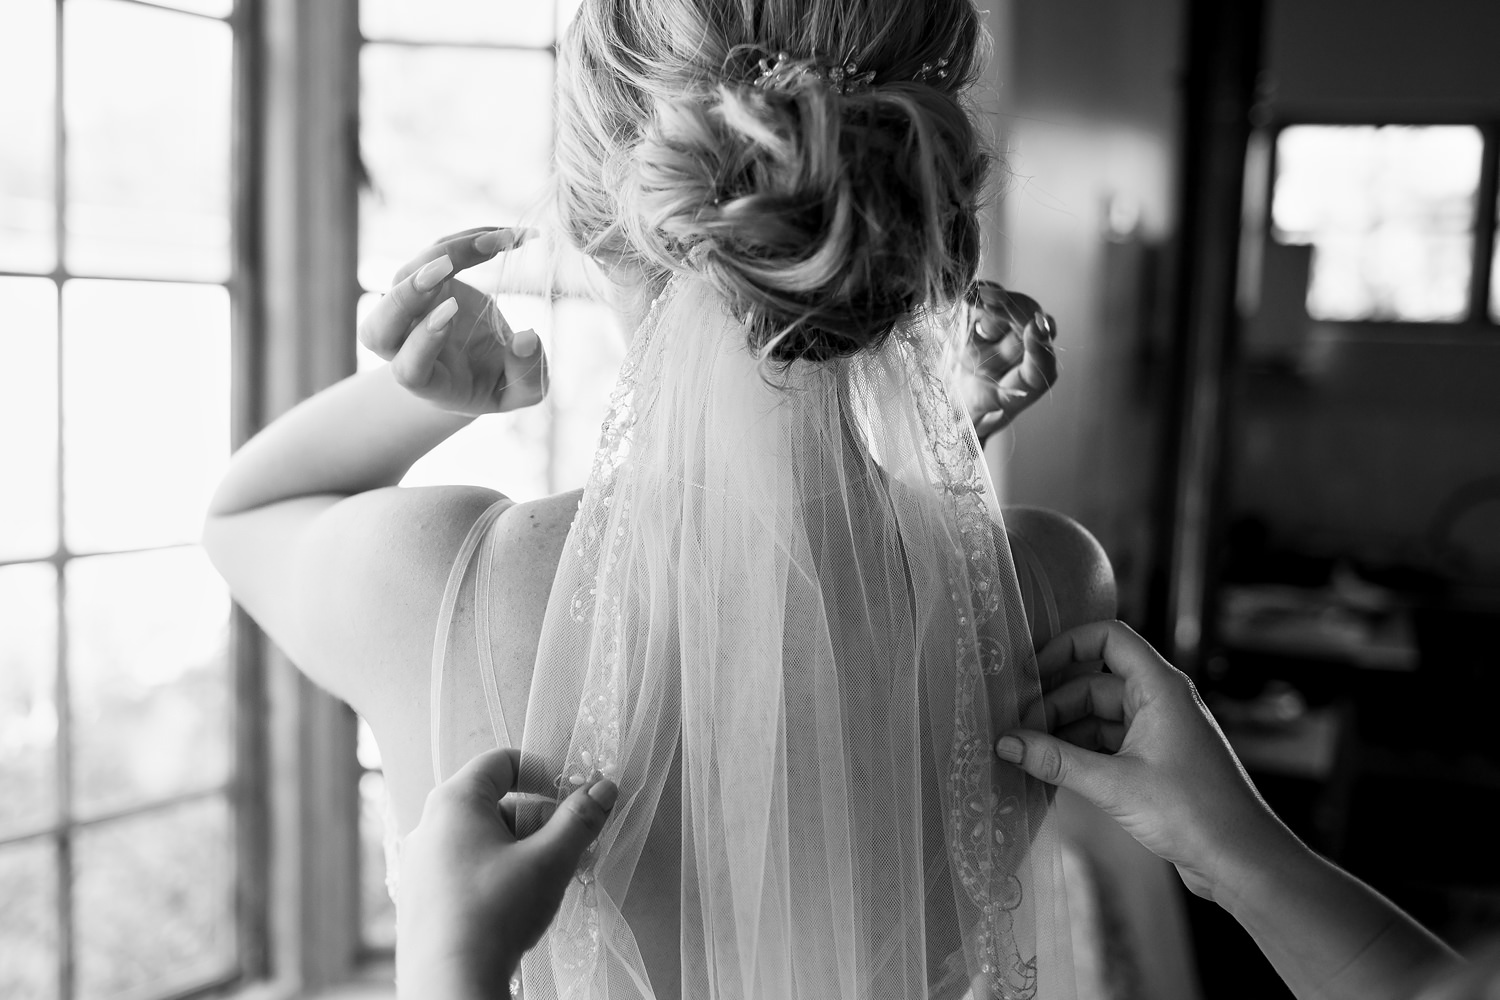 Finishing touches to the veil placement under a messy bun